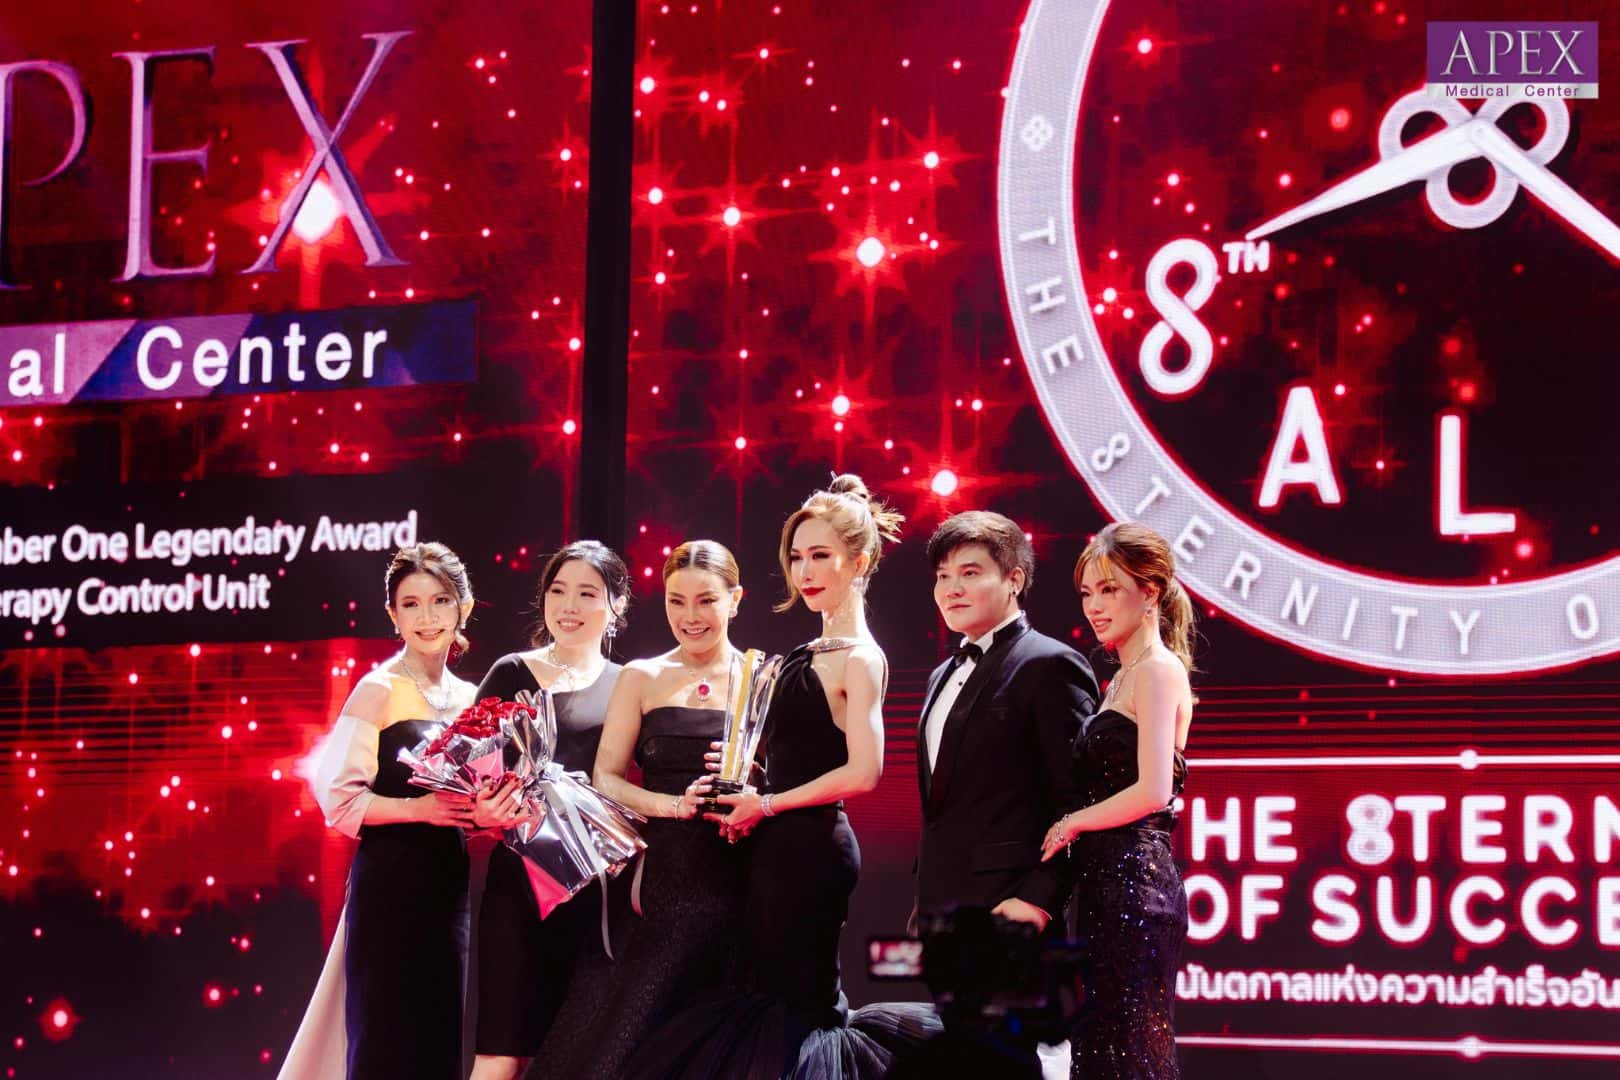 Apex finally wins The Thailand Number One Legendary Award for Ultherapy Control Unit No. 1 service provider in Thailand [03]